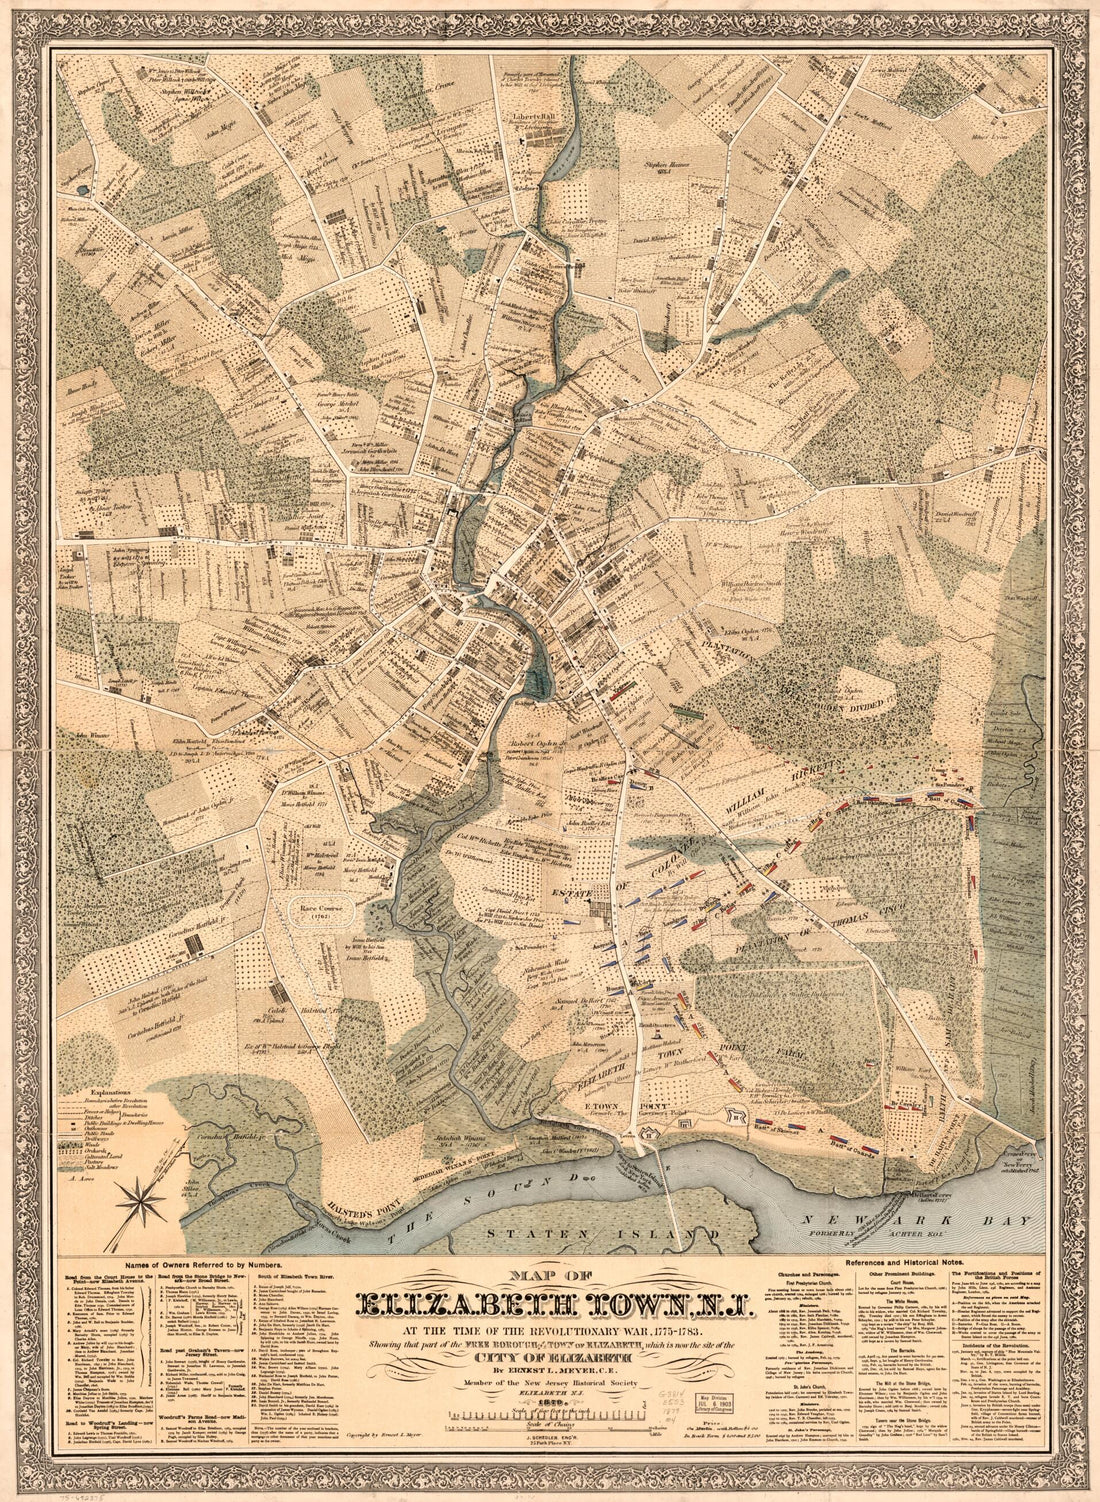 This old map of 1783. Showing That Part of the Free Borough and Town of Elizabeth, Which Is Now the Site of the City of Elizabeth from 1879 was created by Ernest L. Meyer, J. (Joseph) Schedler in 1879